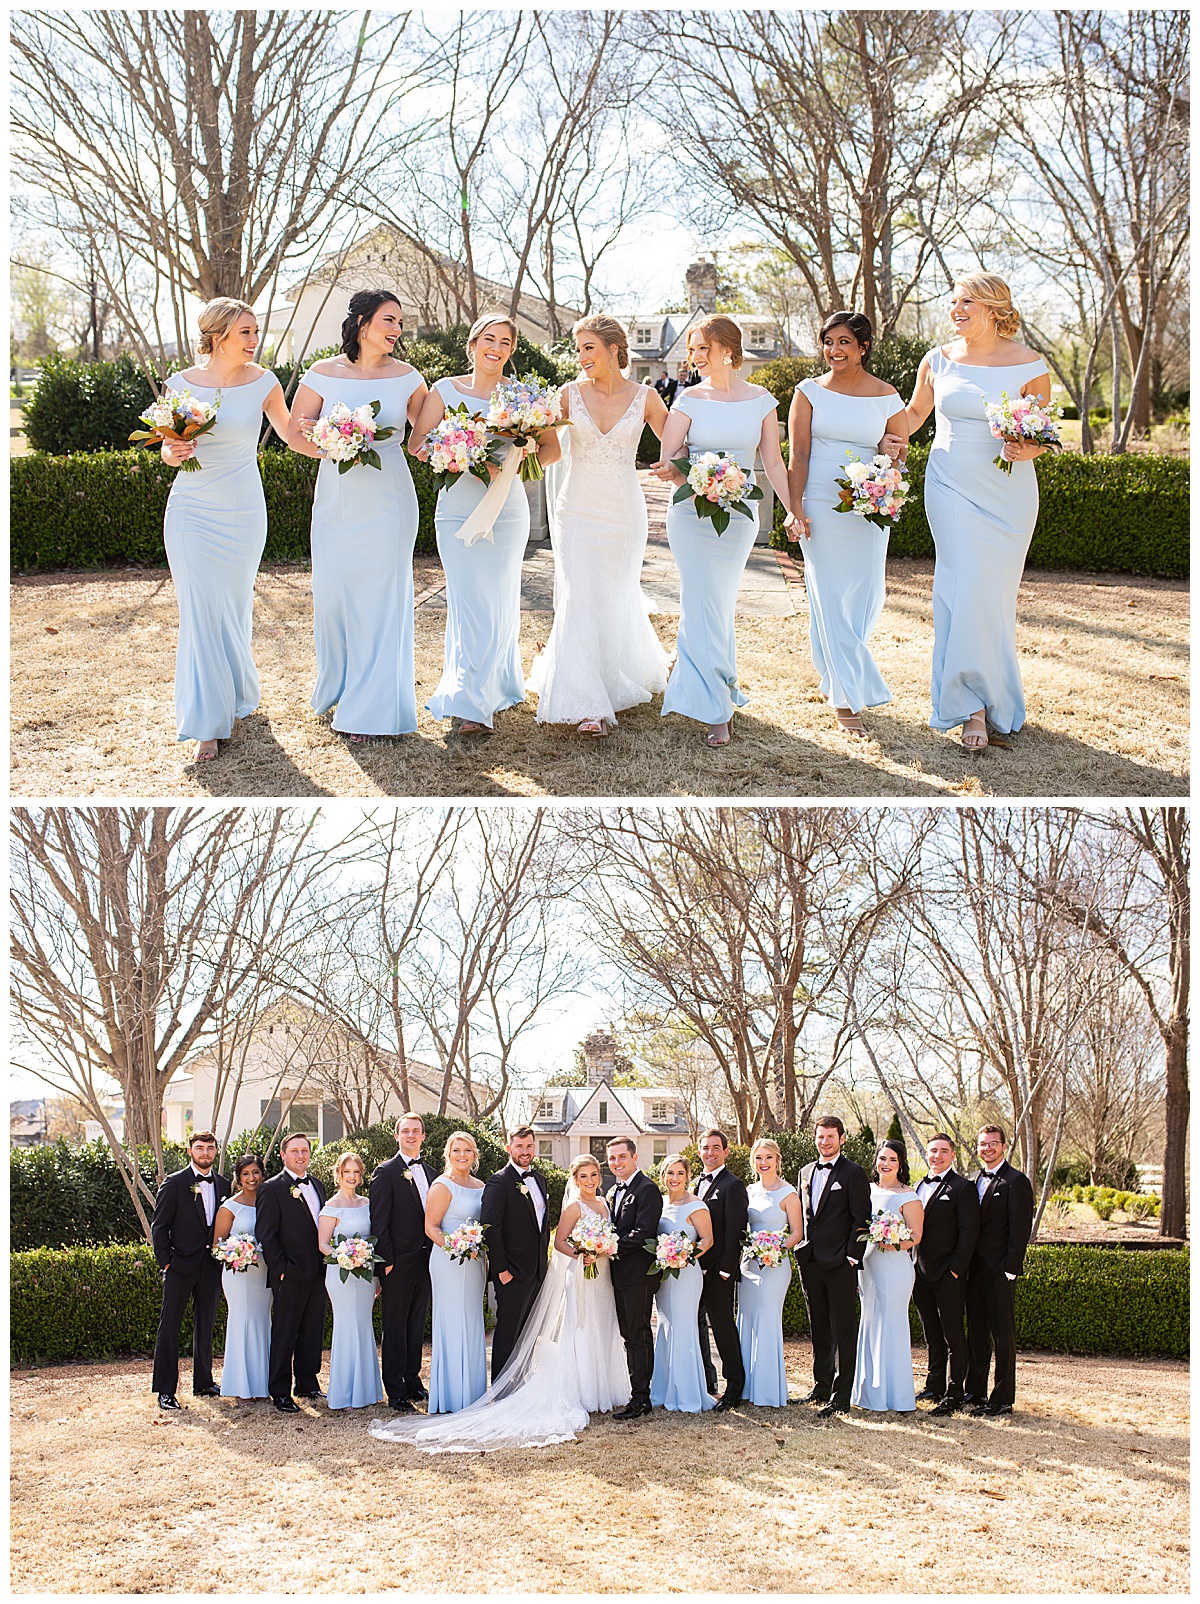 blue bridesmaids dresses and bride with blonde hair groomsmen in black tuxedos